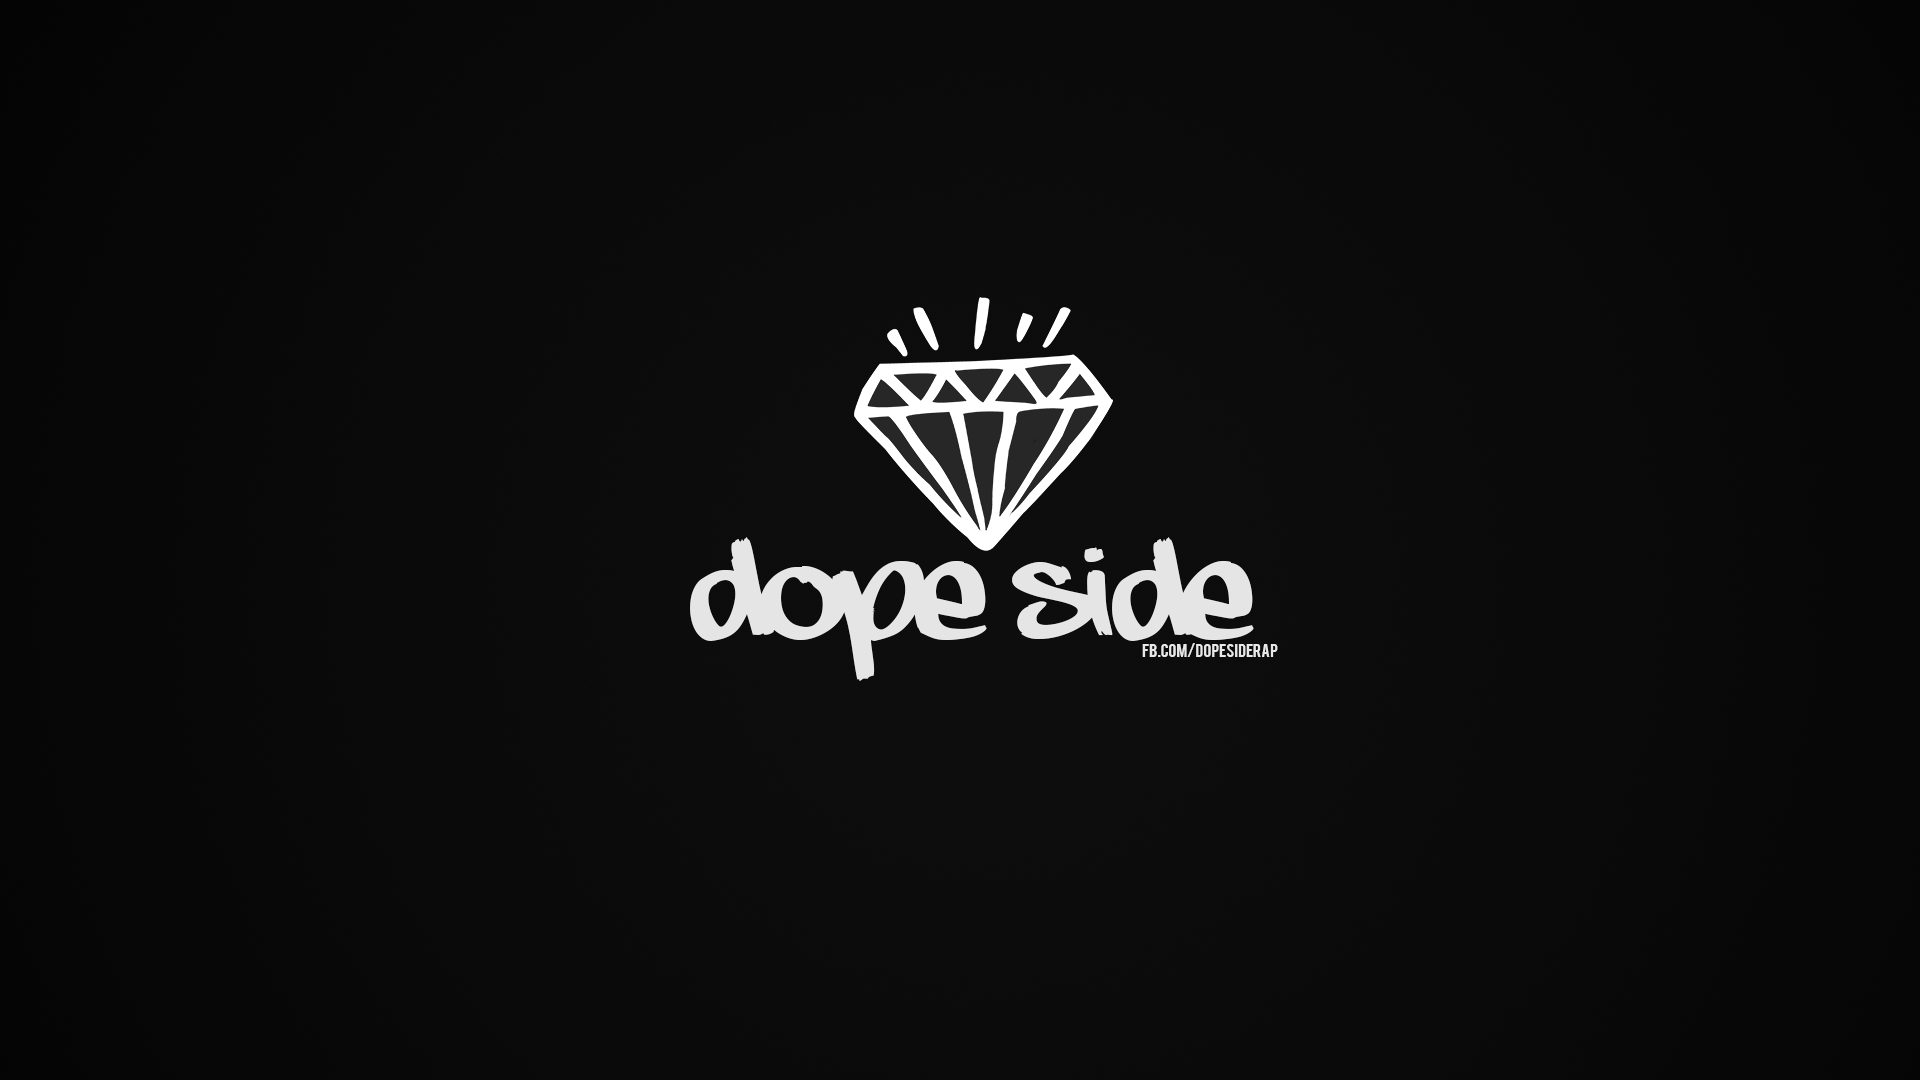 DOPE WALLPAPERS FREE Wallpapers Background images   hippowallpapers